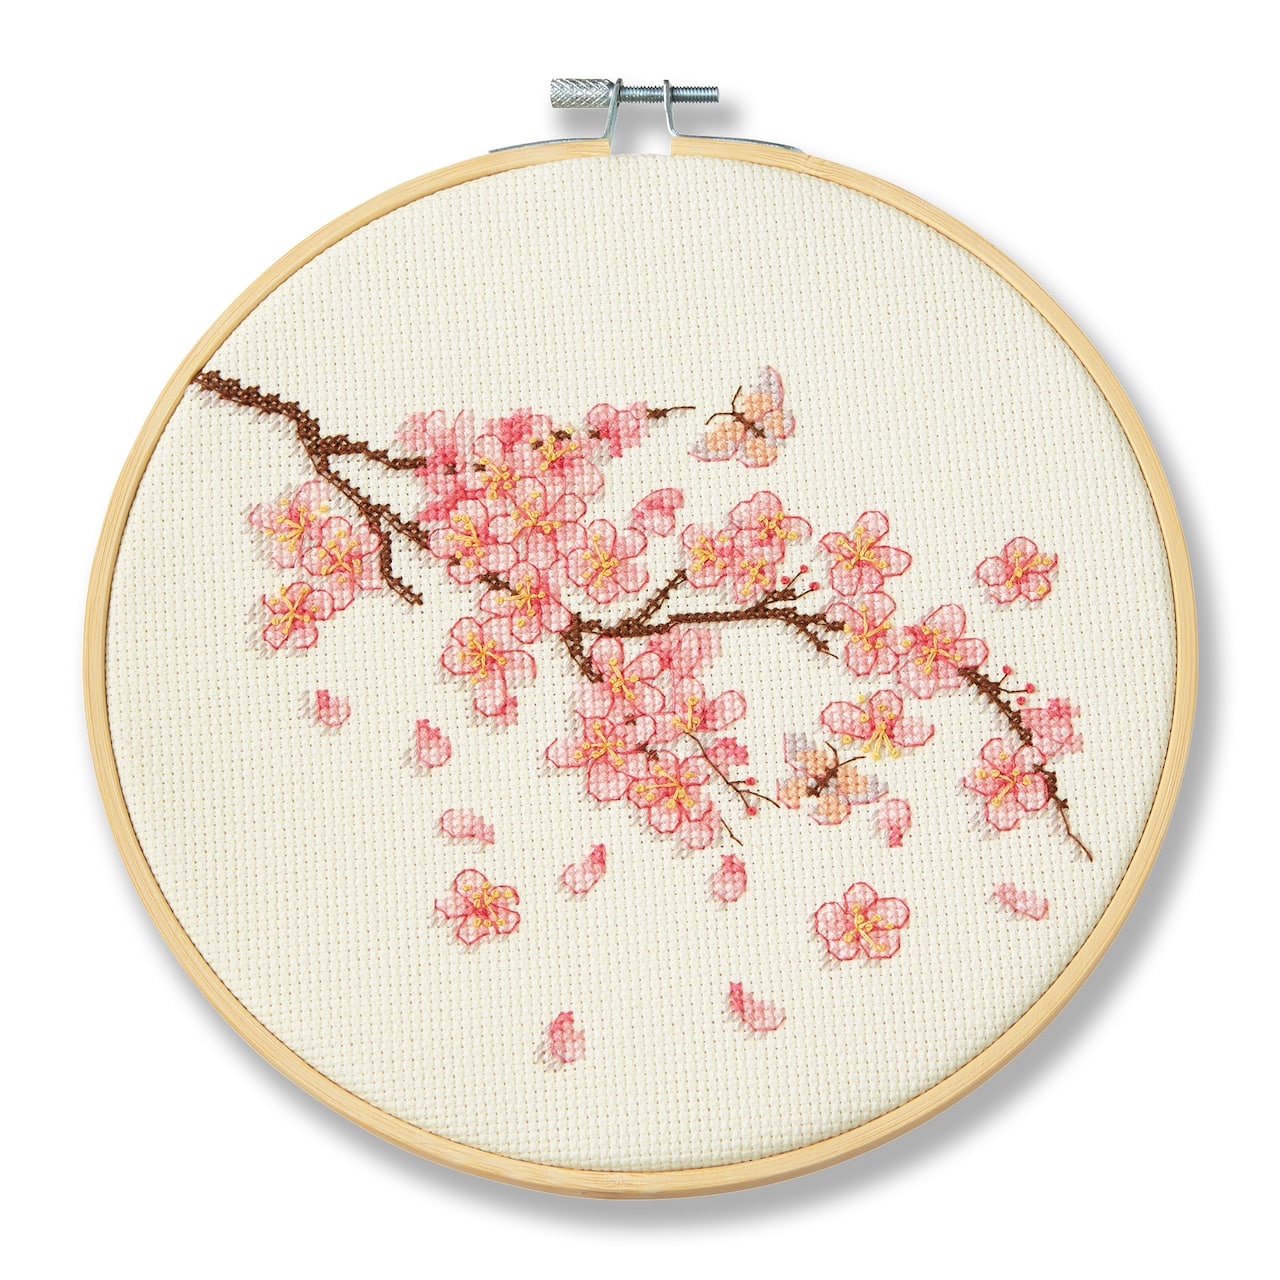 Cherry Blossom Cross Stitch Kit by Loops & Threads®